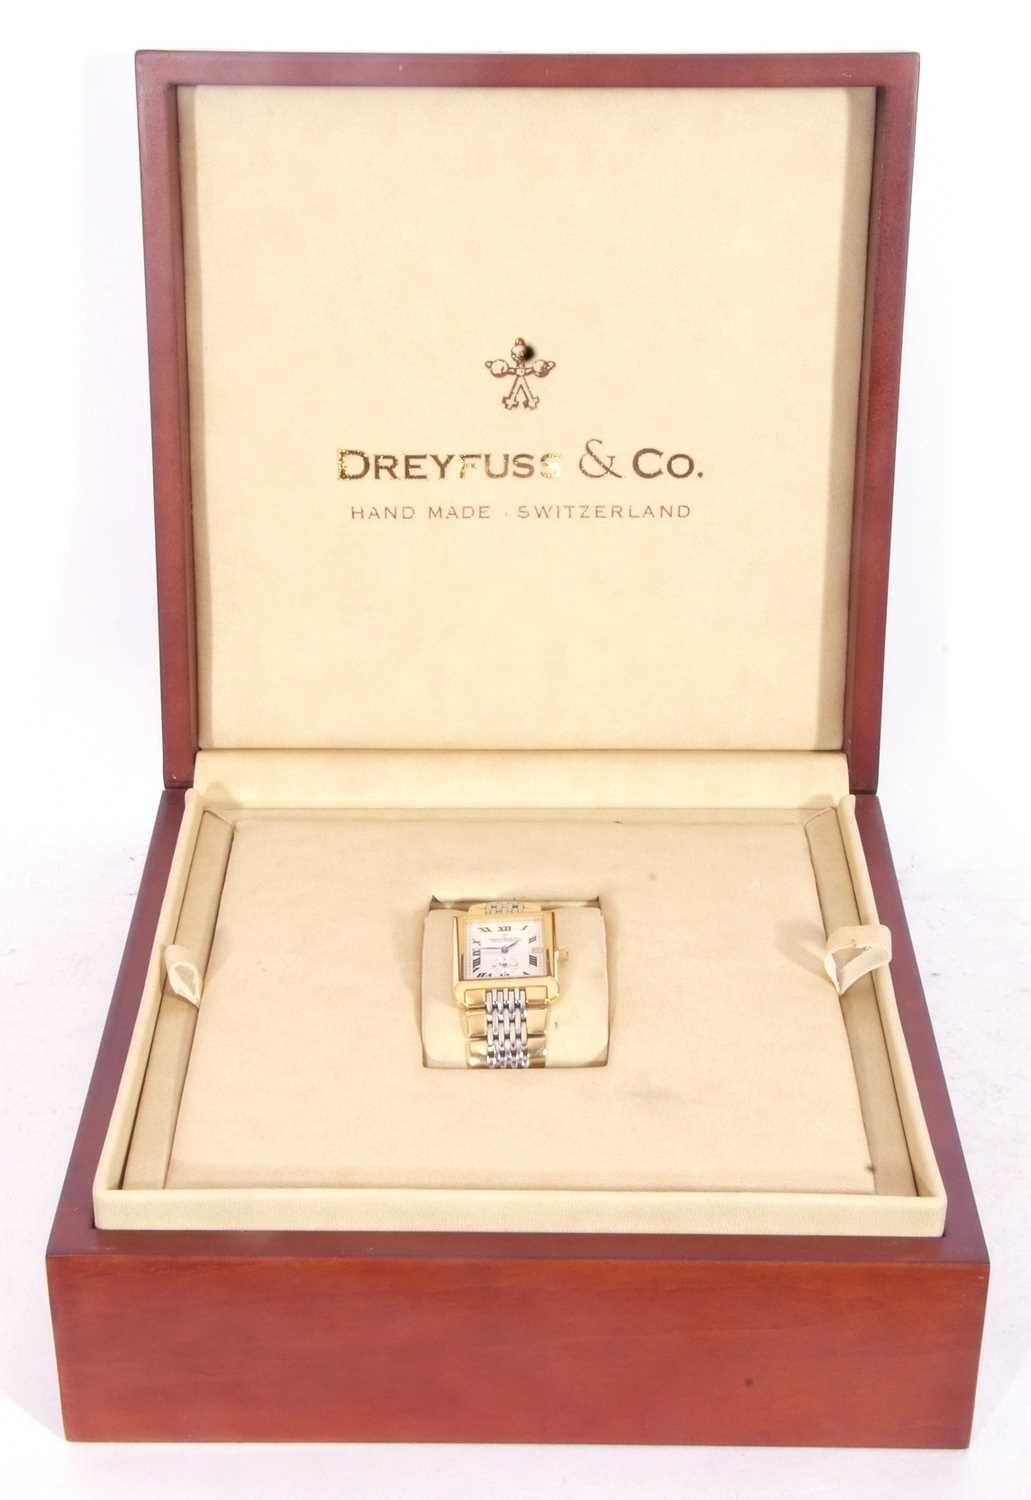 Dreyfuss & Co gent's wrist watch, ref no 1974, date function window, the case gold plated, and a - Image 5 of 10